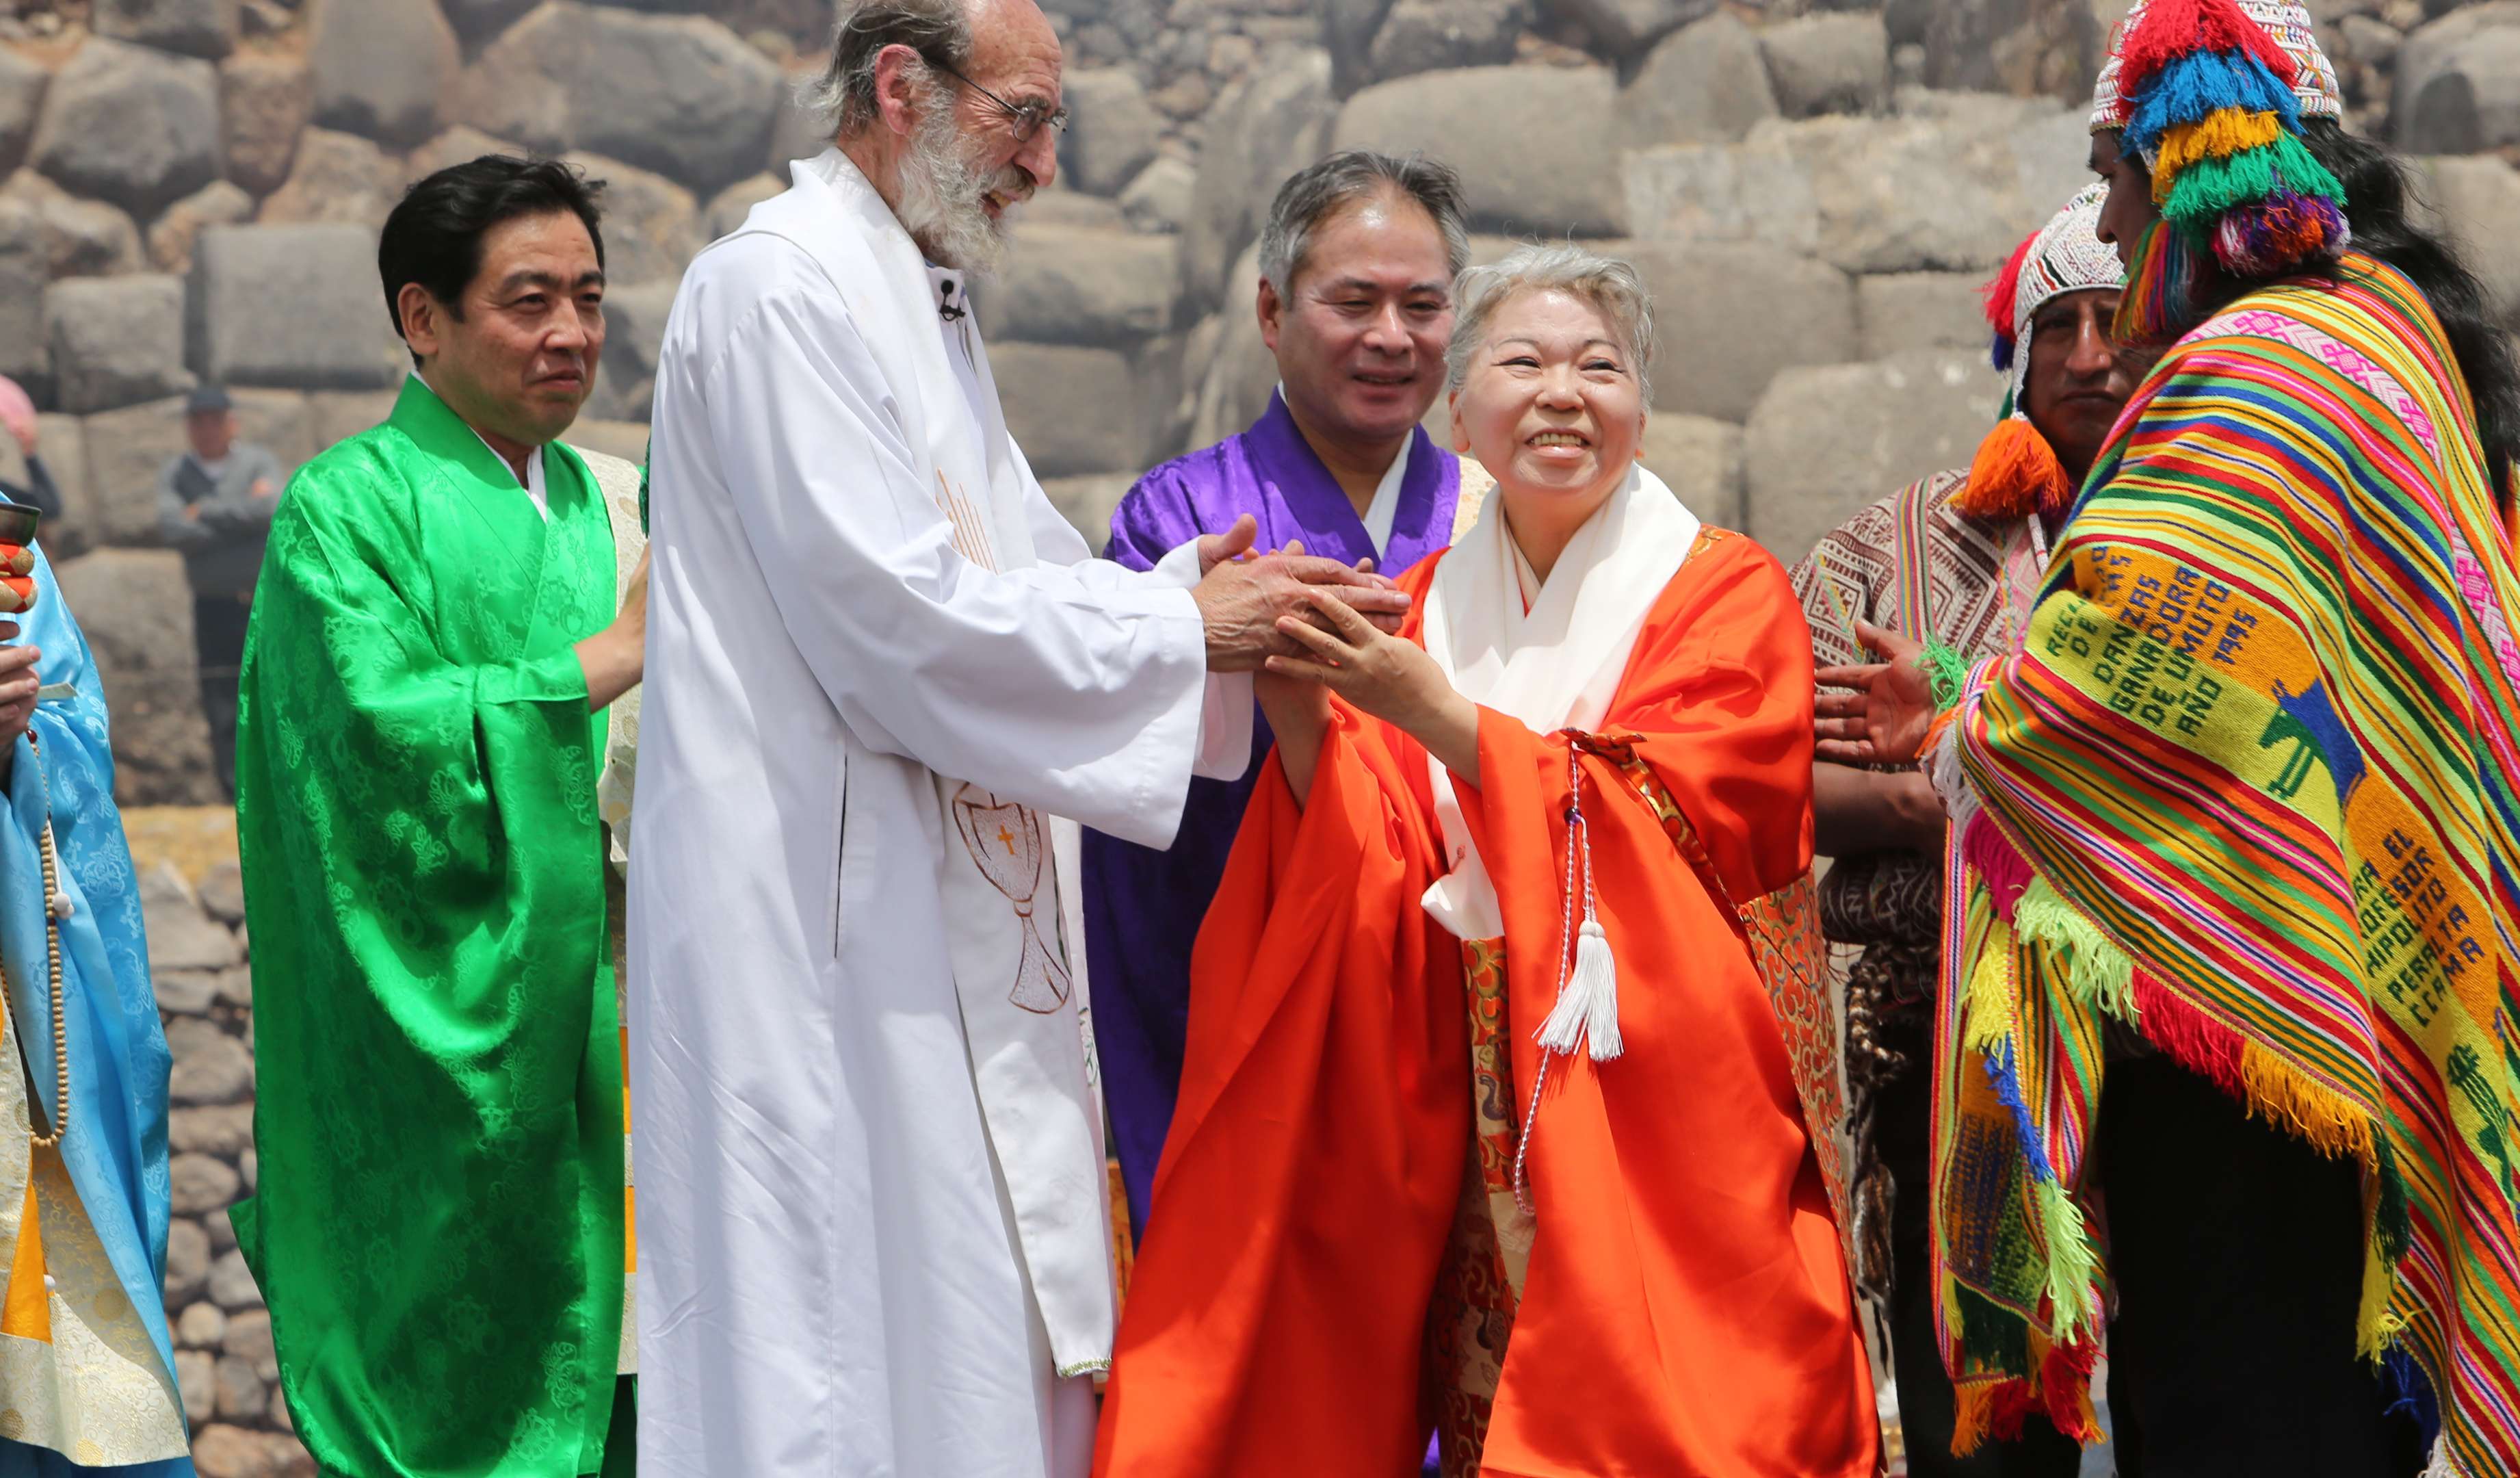 Her Holiness, in bright orange robes, clasps the hands of an elderly Christian priest in white robes as she looks, smiling, at a Peruvian man dressed in brightly colored traditional dress.